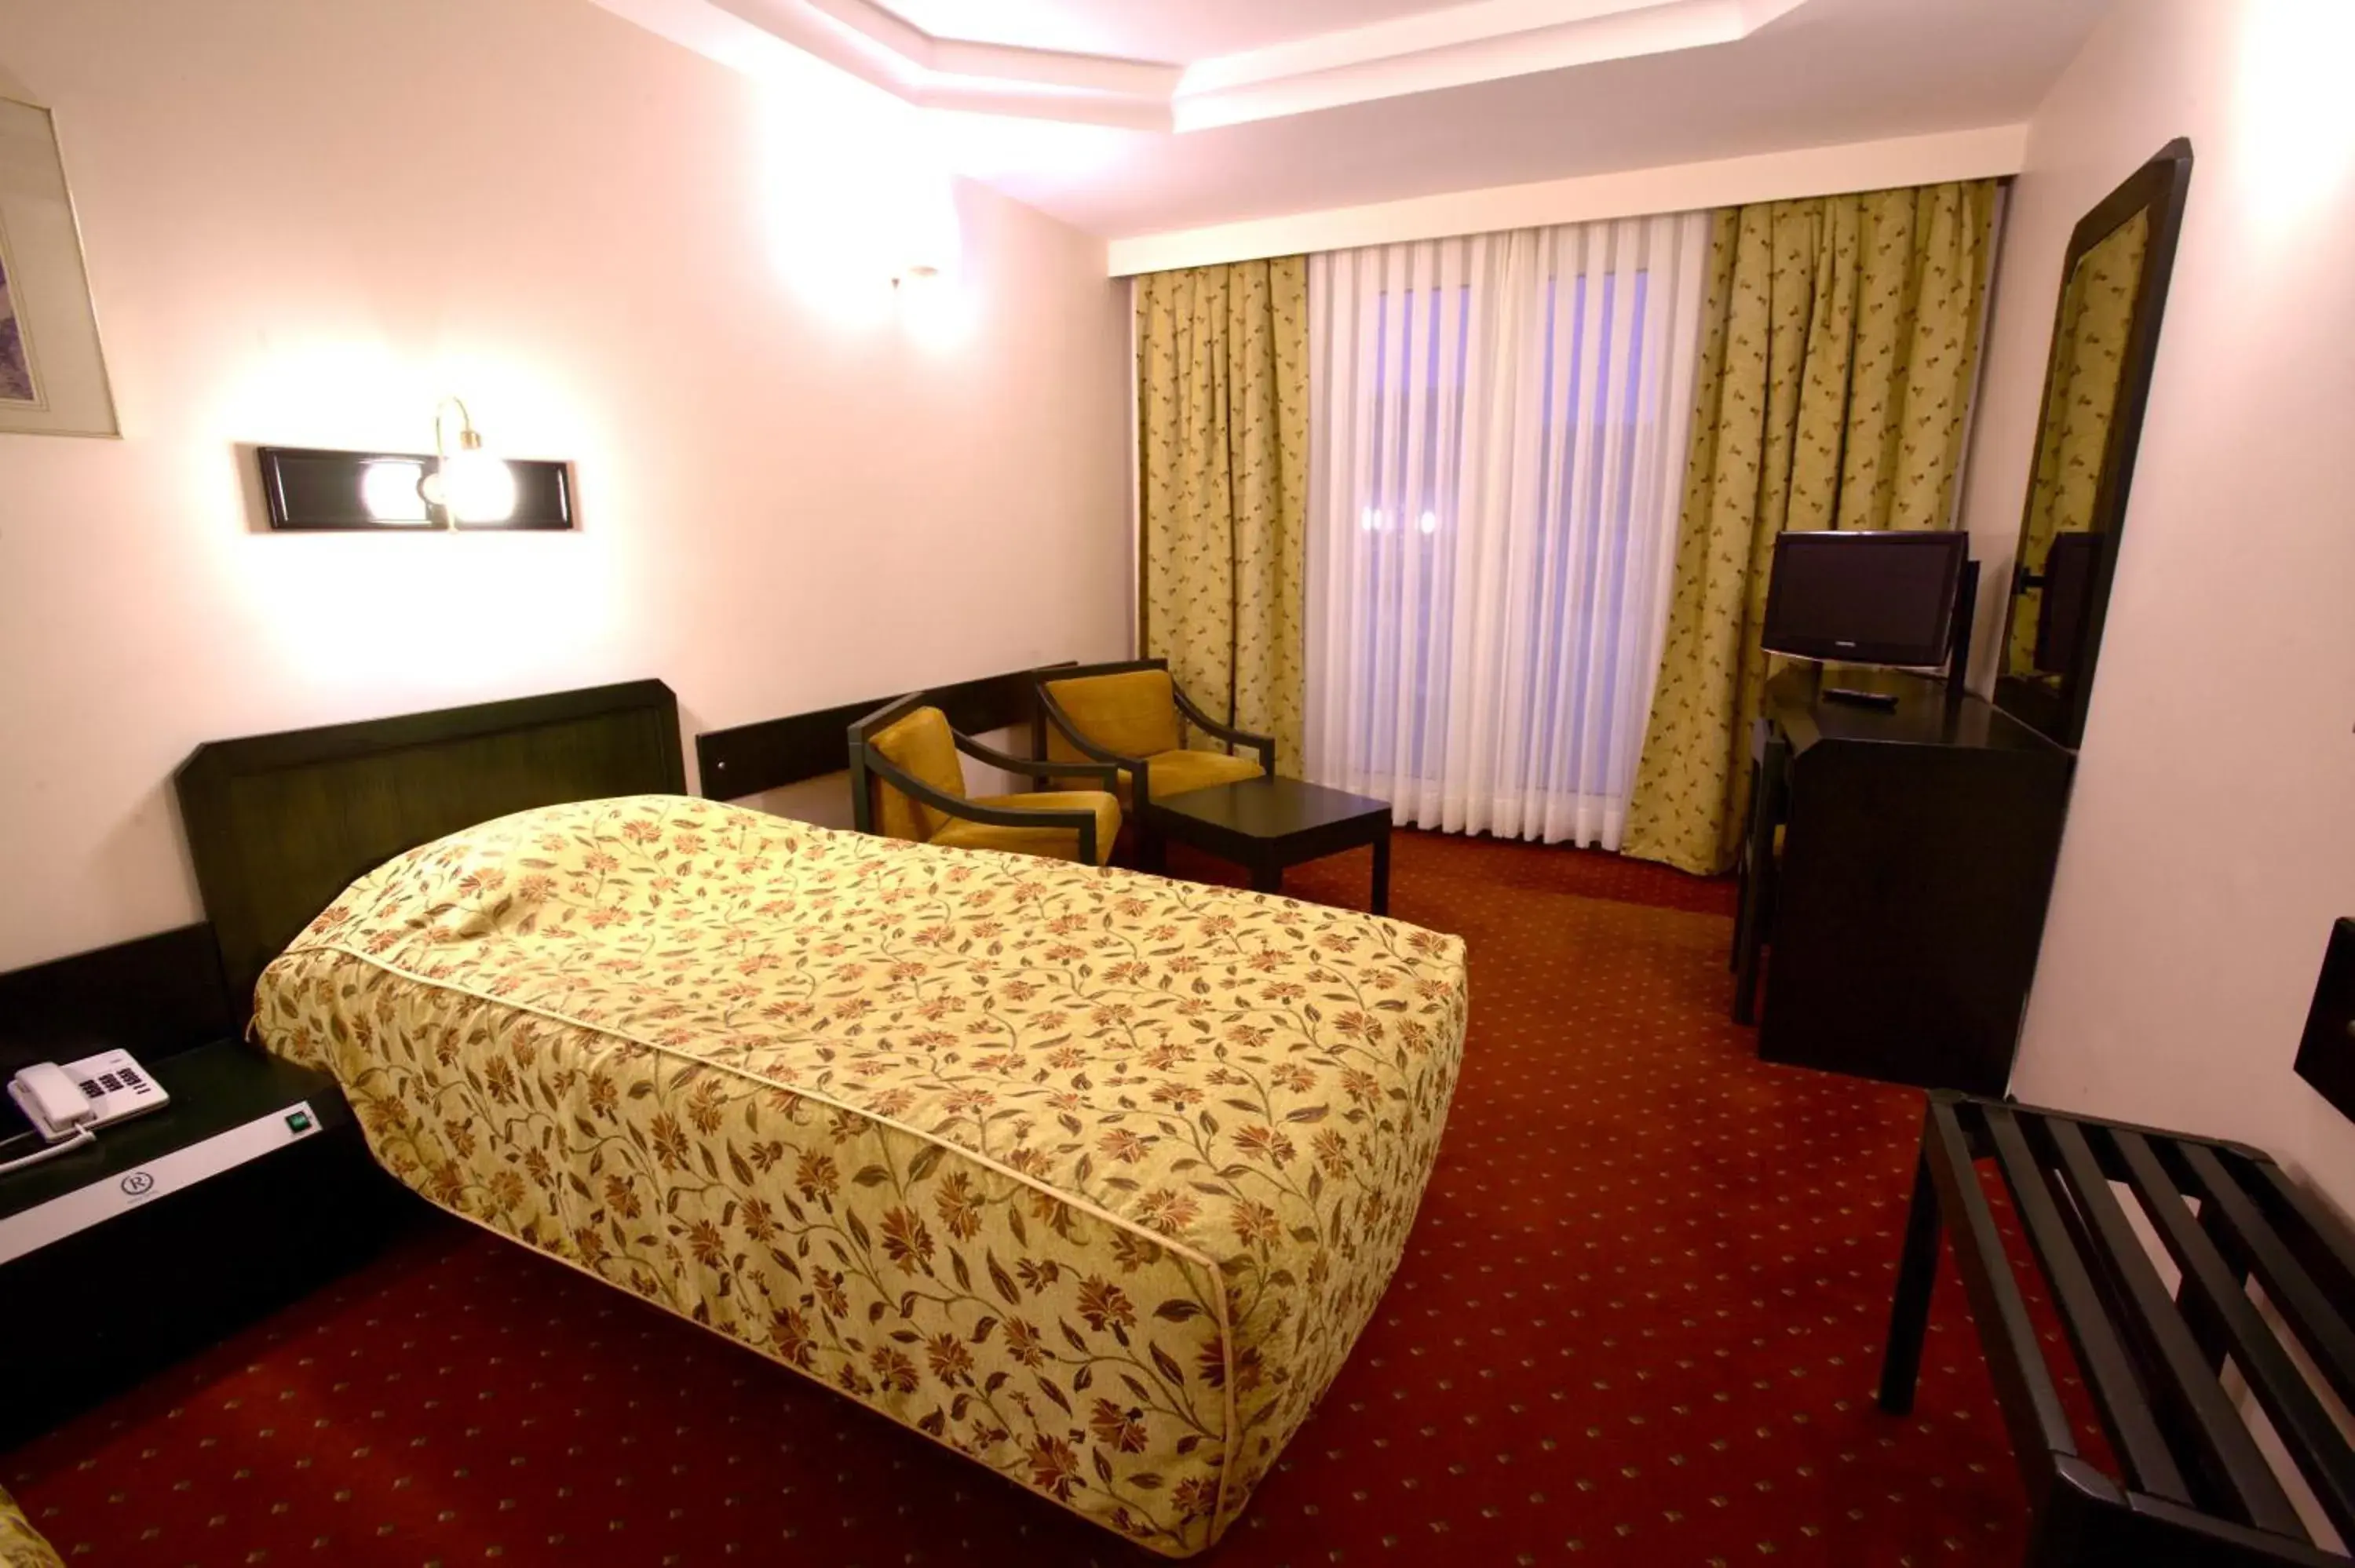 Deluxe King Room - single occupancy in Istanbul Royal Hotel